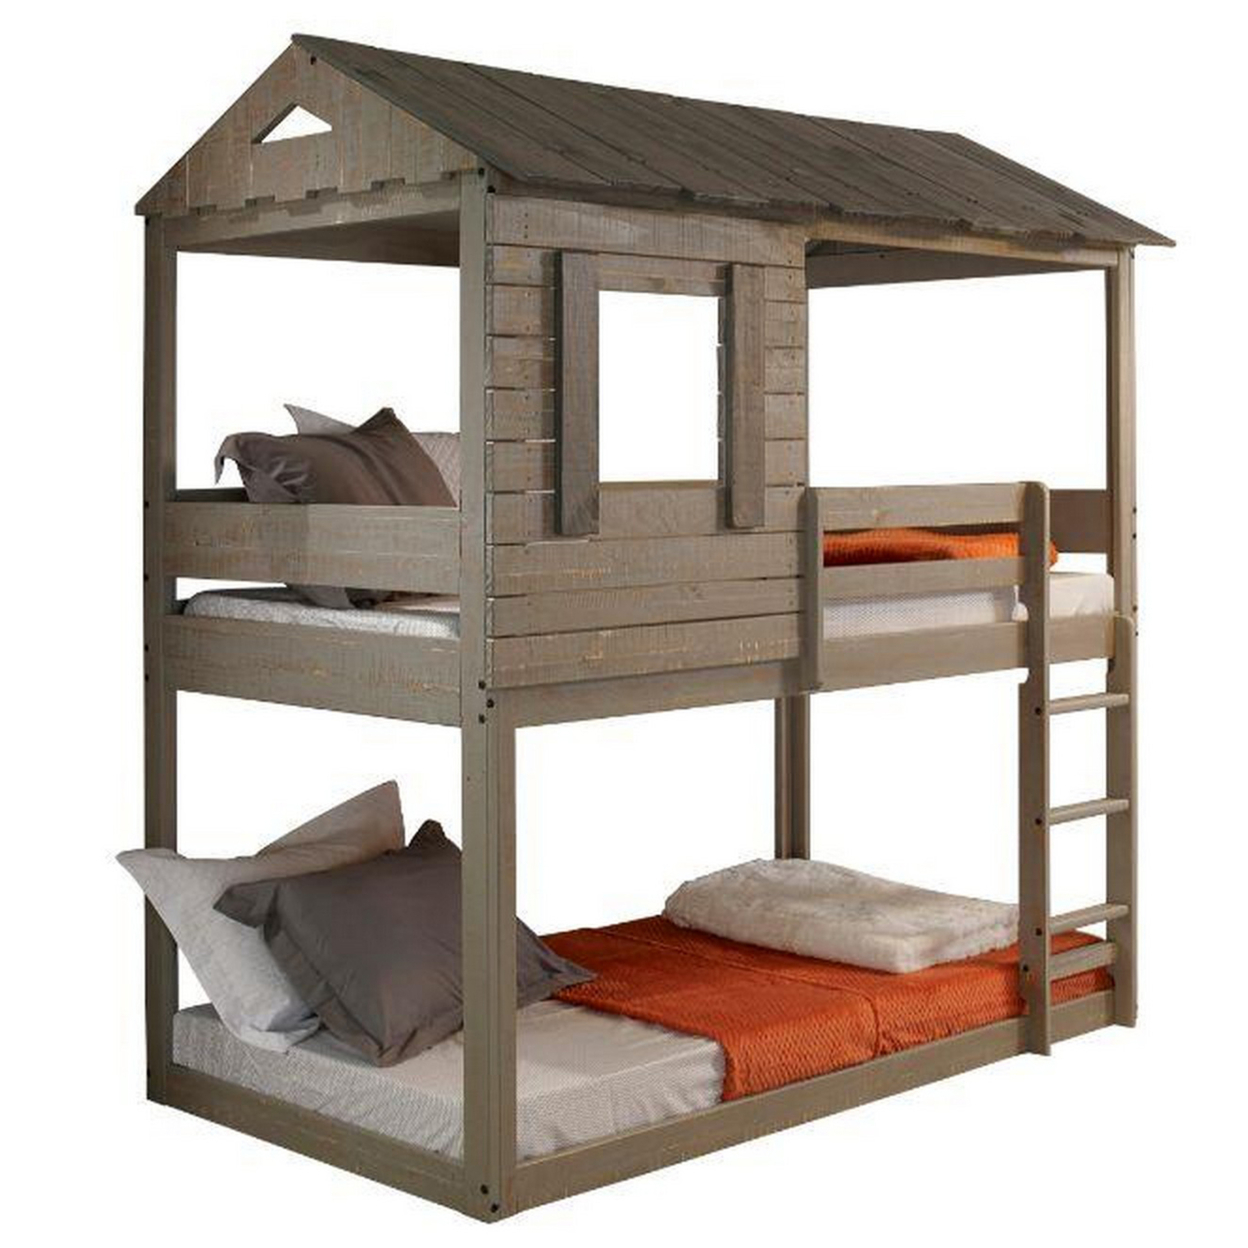 Twin Size Wooden Bunk Bed With House Design, Brown- Saltoro Sherpi